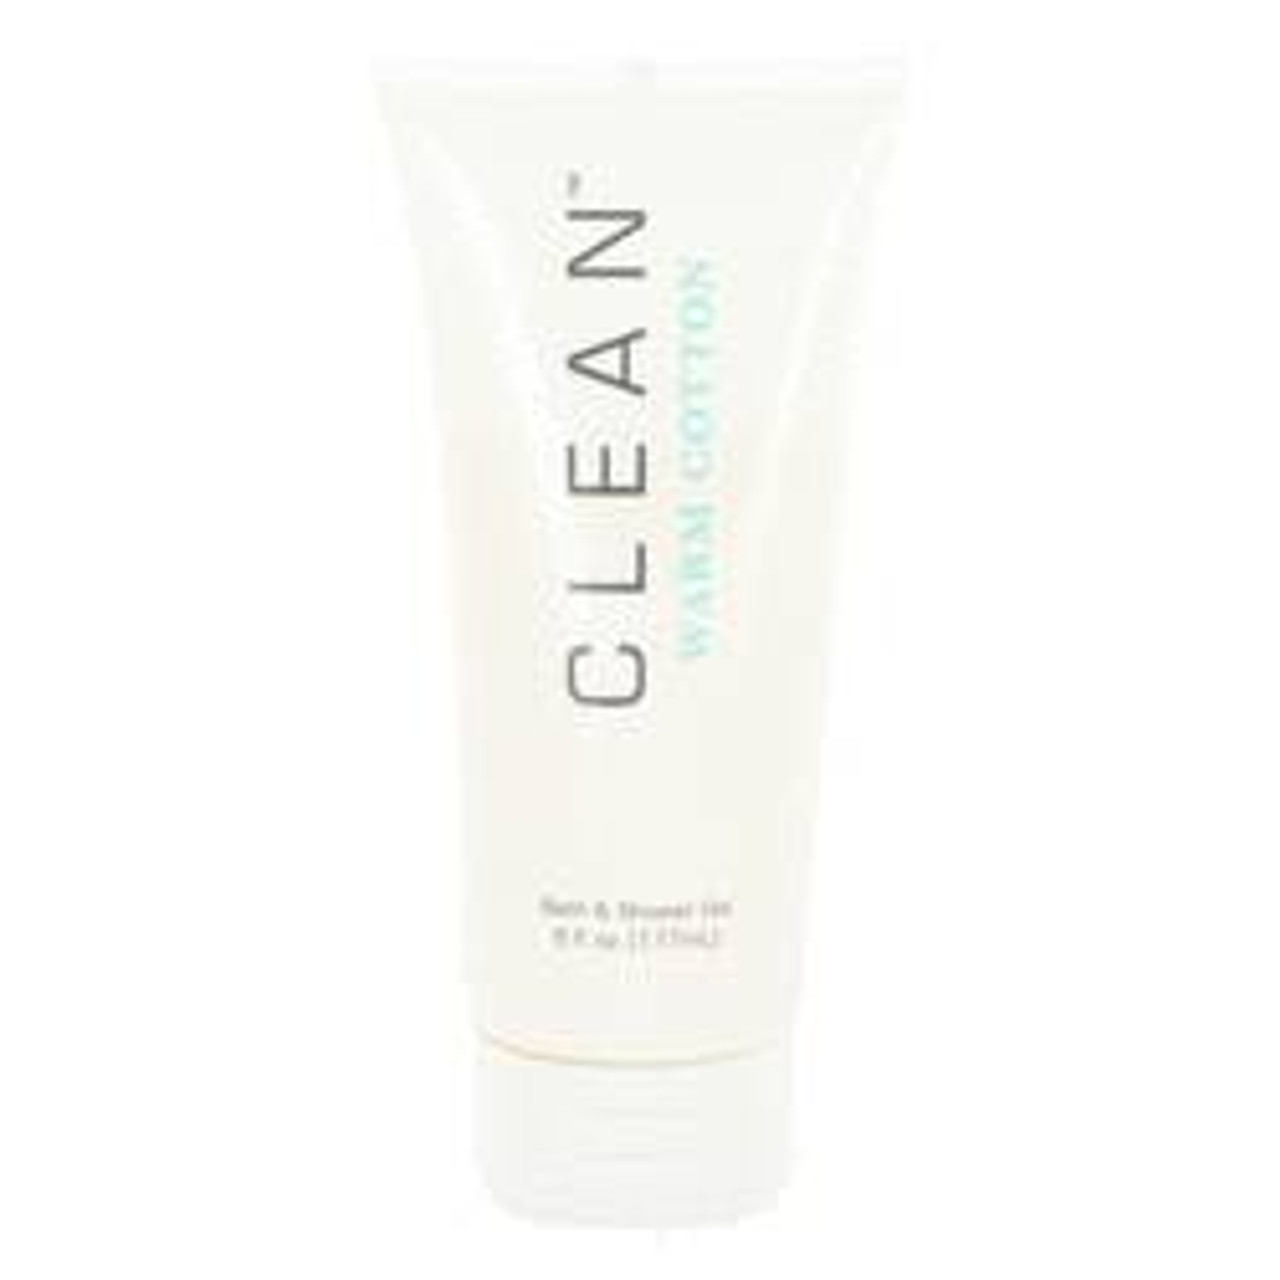 Clean Warm Cotton Perfume By Clean Shower Gel 6 oz for Women - [From 39.00 - Choose pk Qty ] - *Ships from Miami